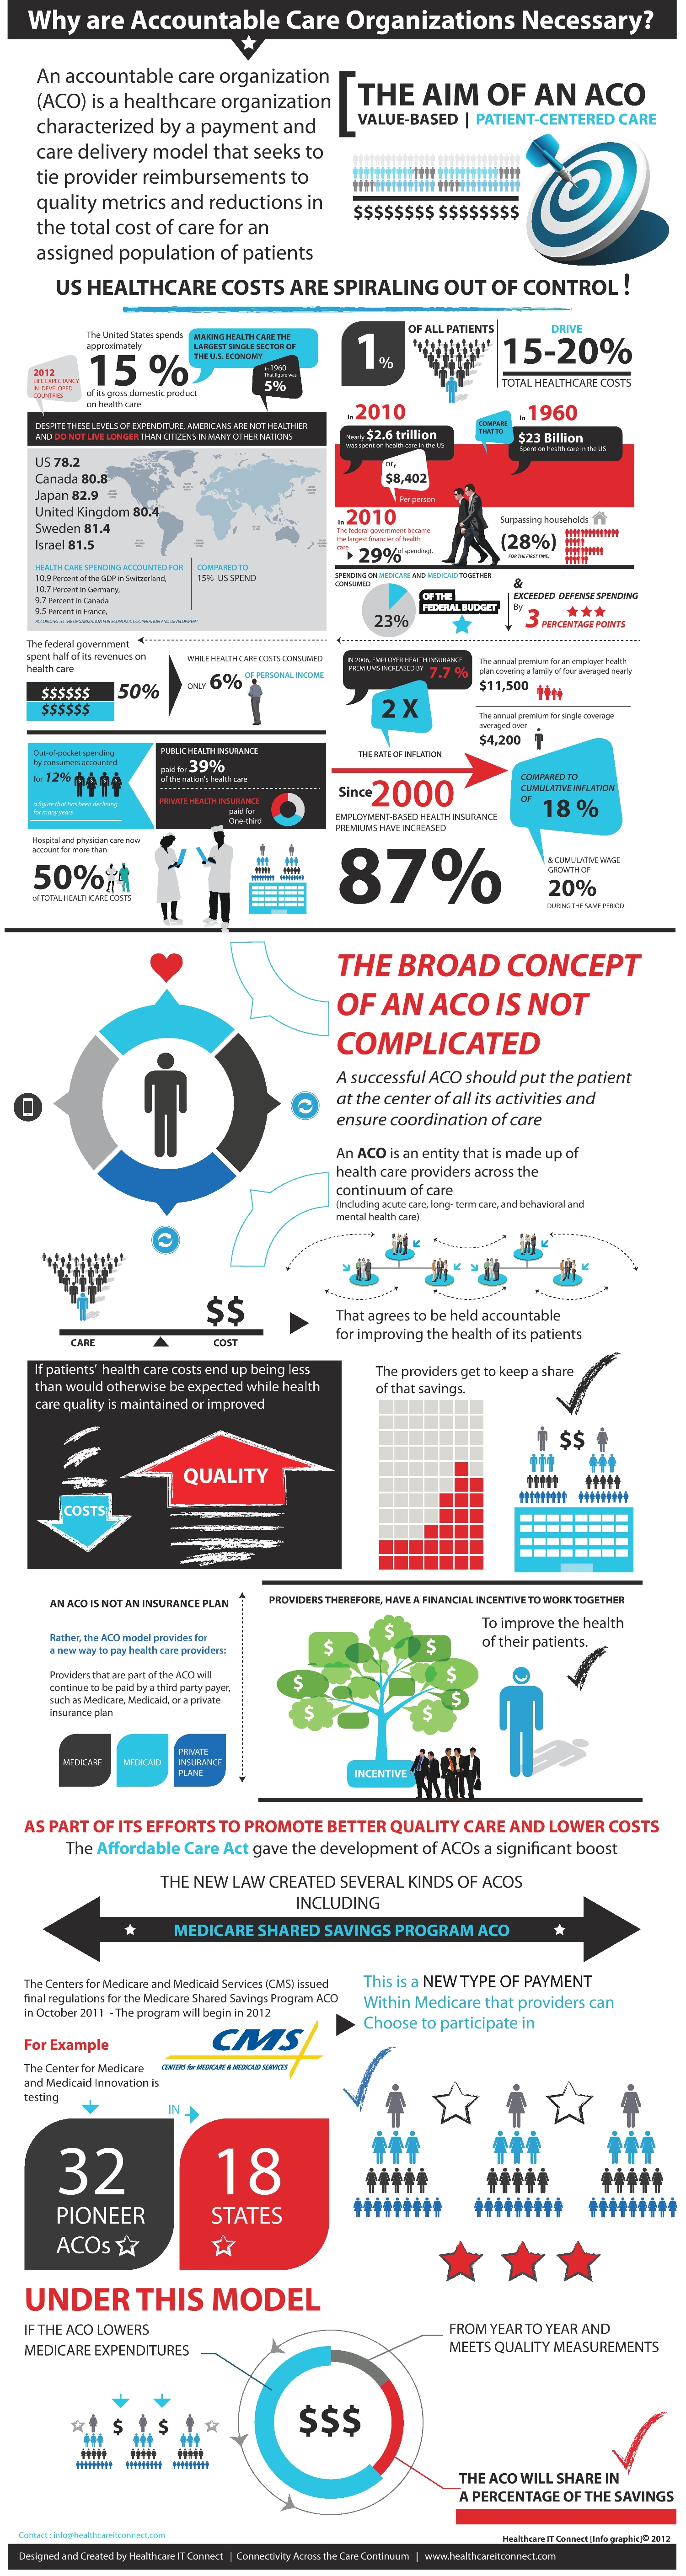 Why-Are-Accountable-Care-Organizations-Necessary-Infographic